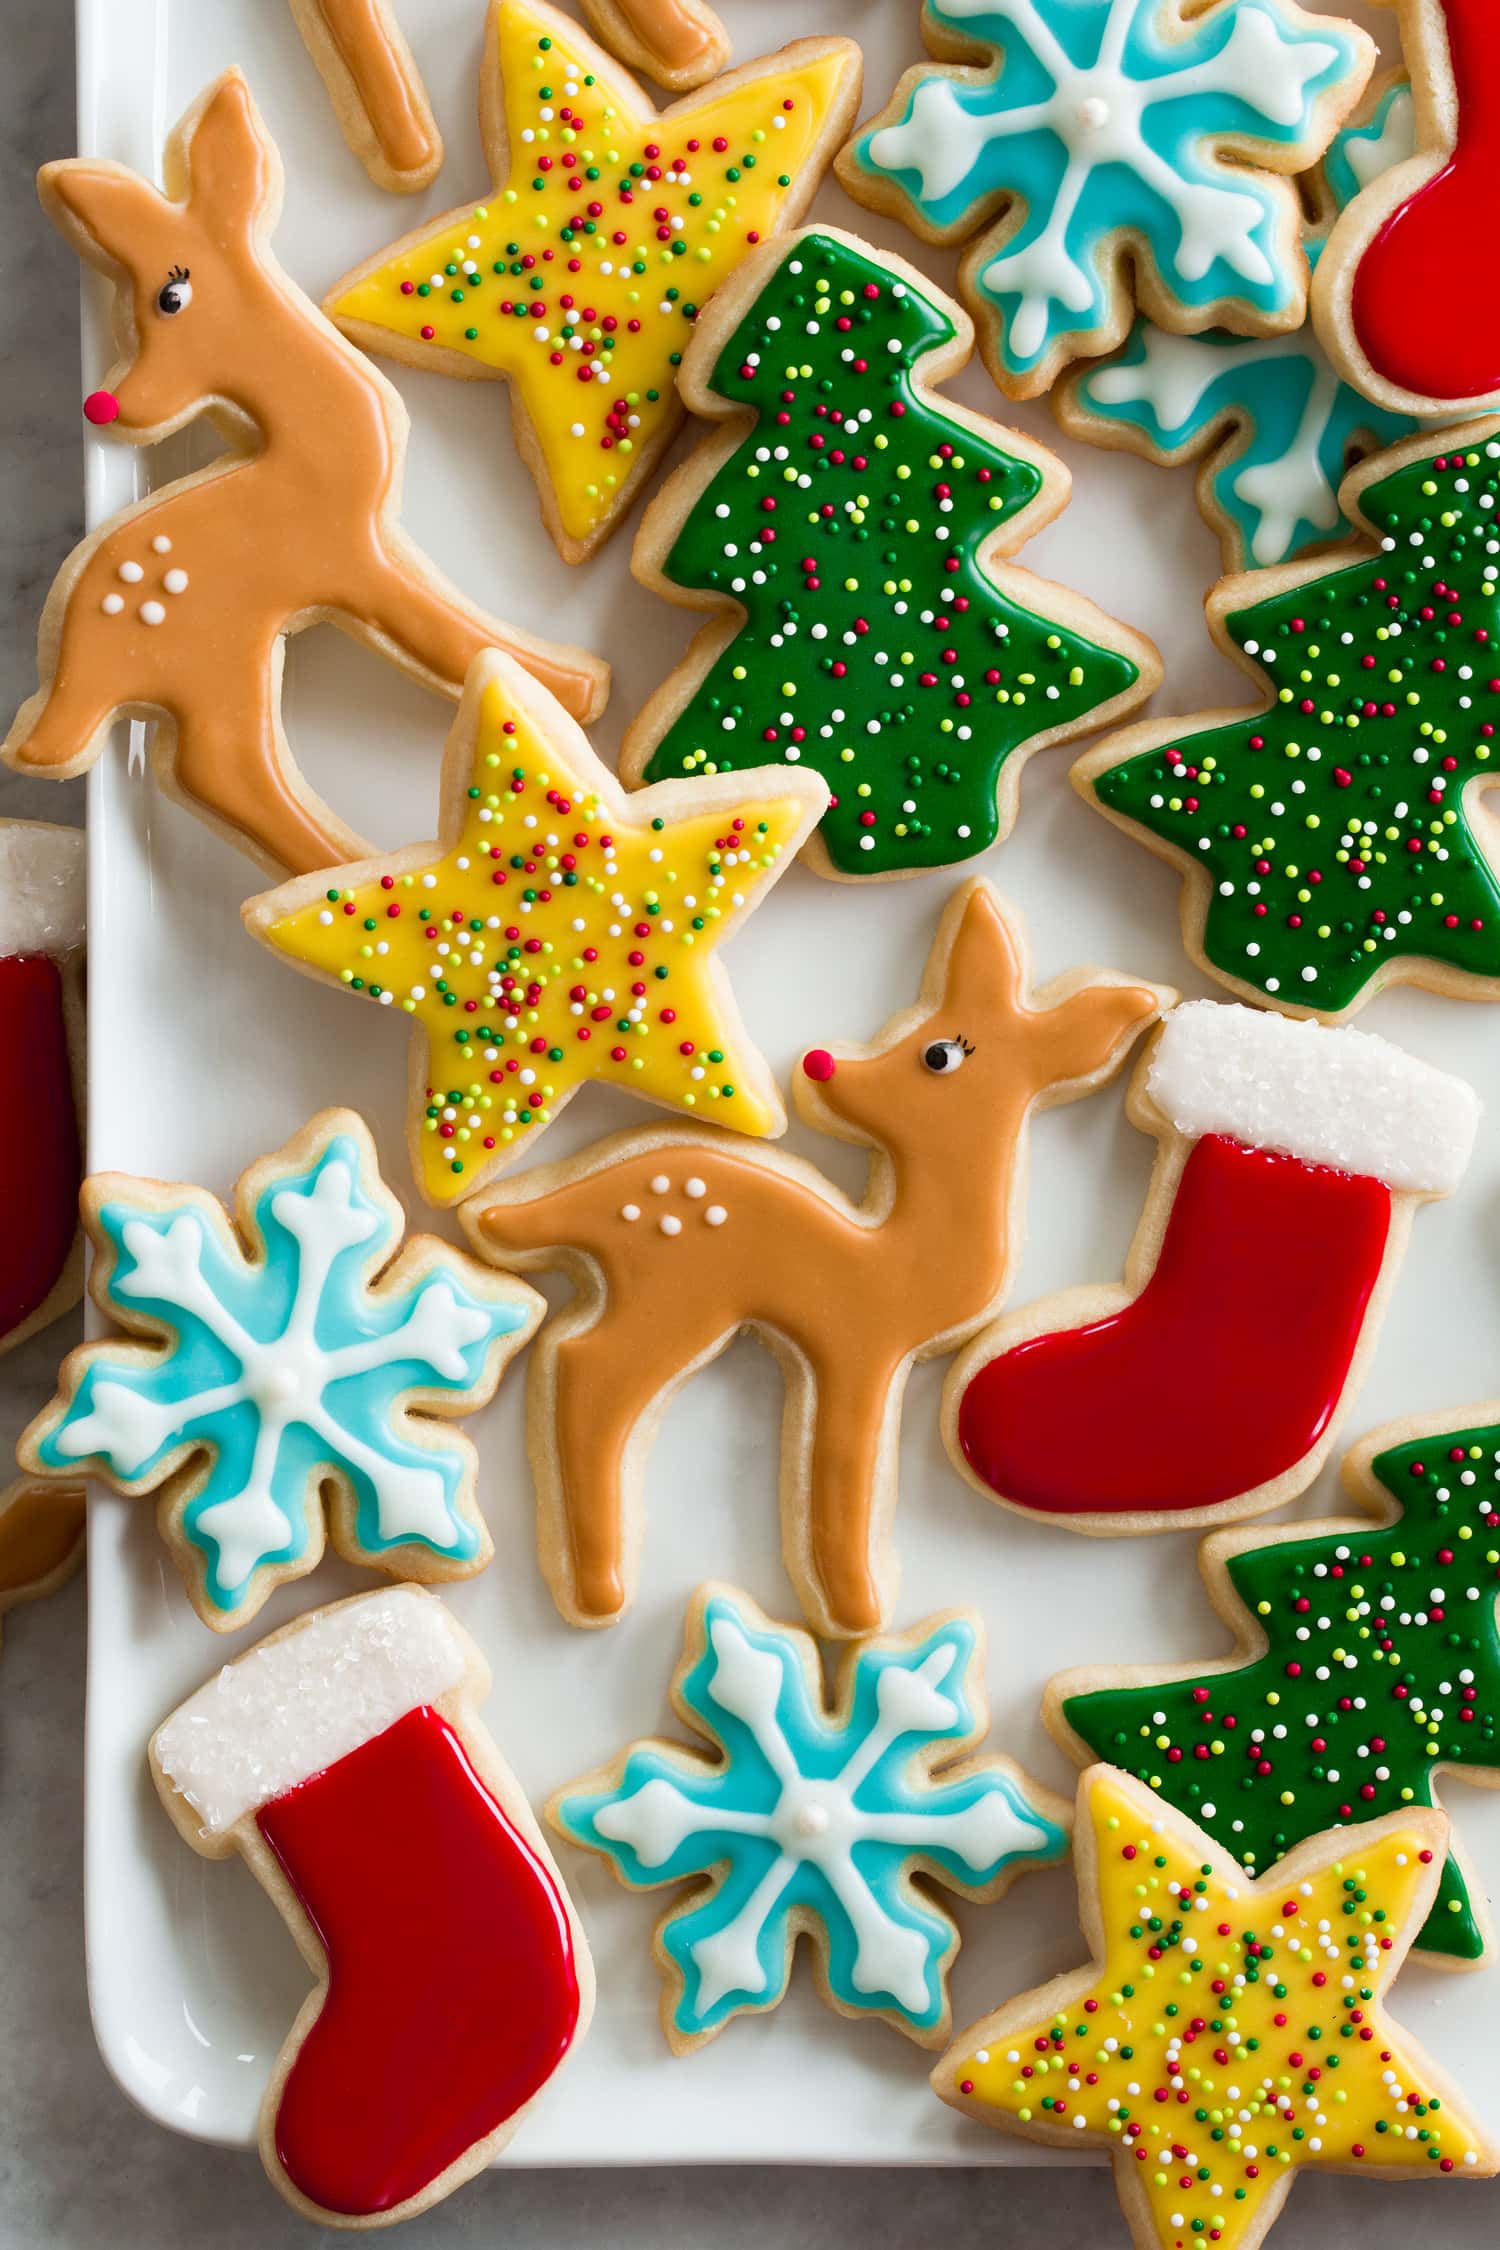 Sugar cookie icing shown over cookies in various colors and shapes.